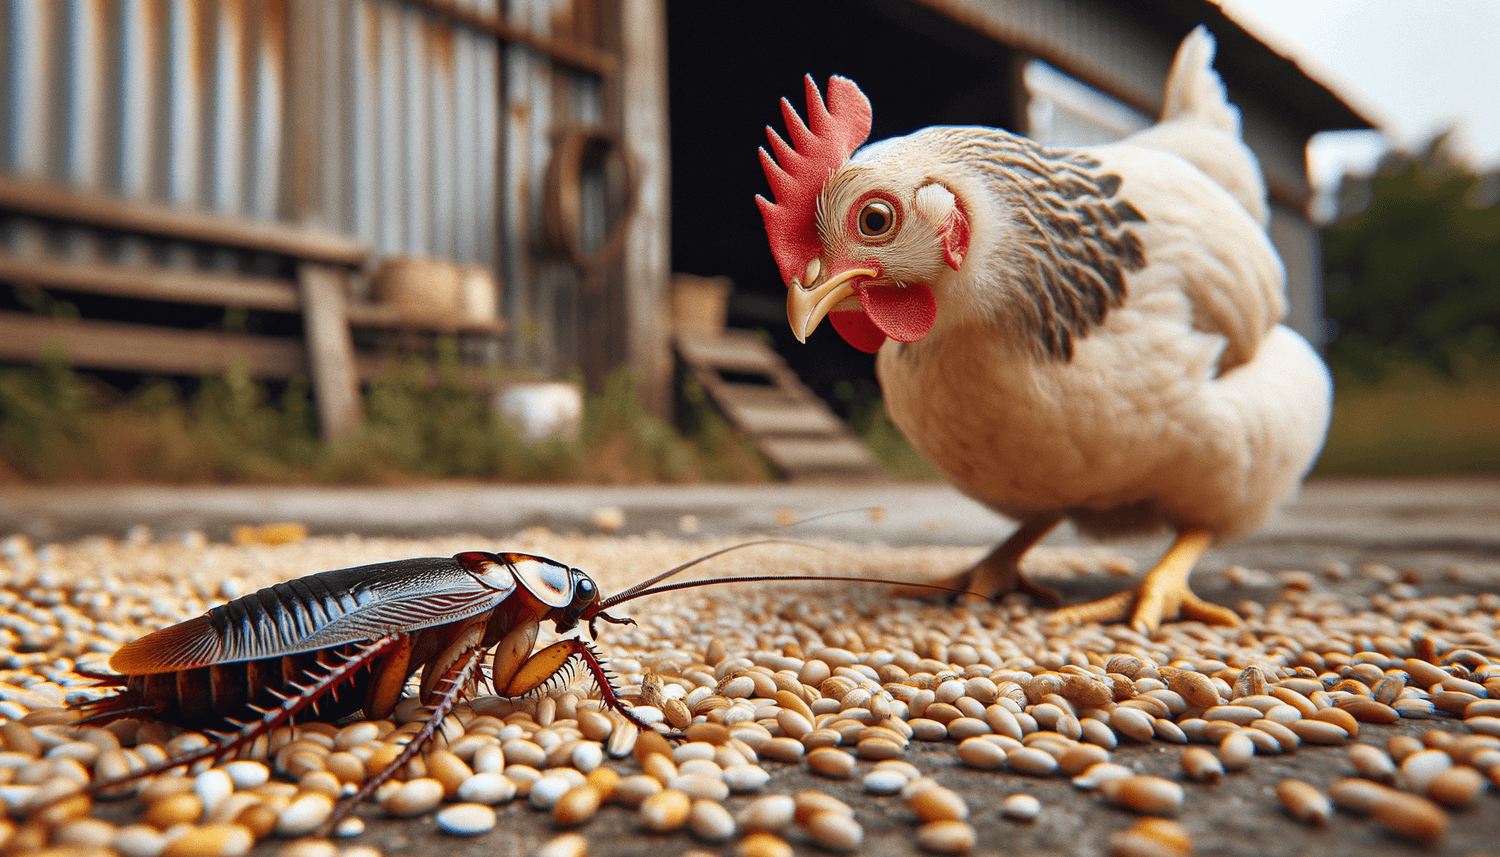 Can Chickens Eat Roaches?